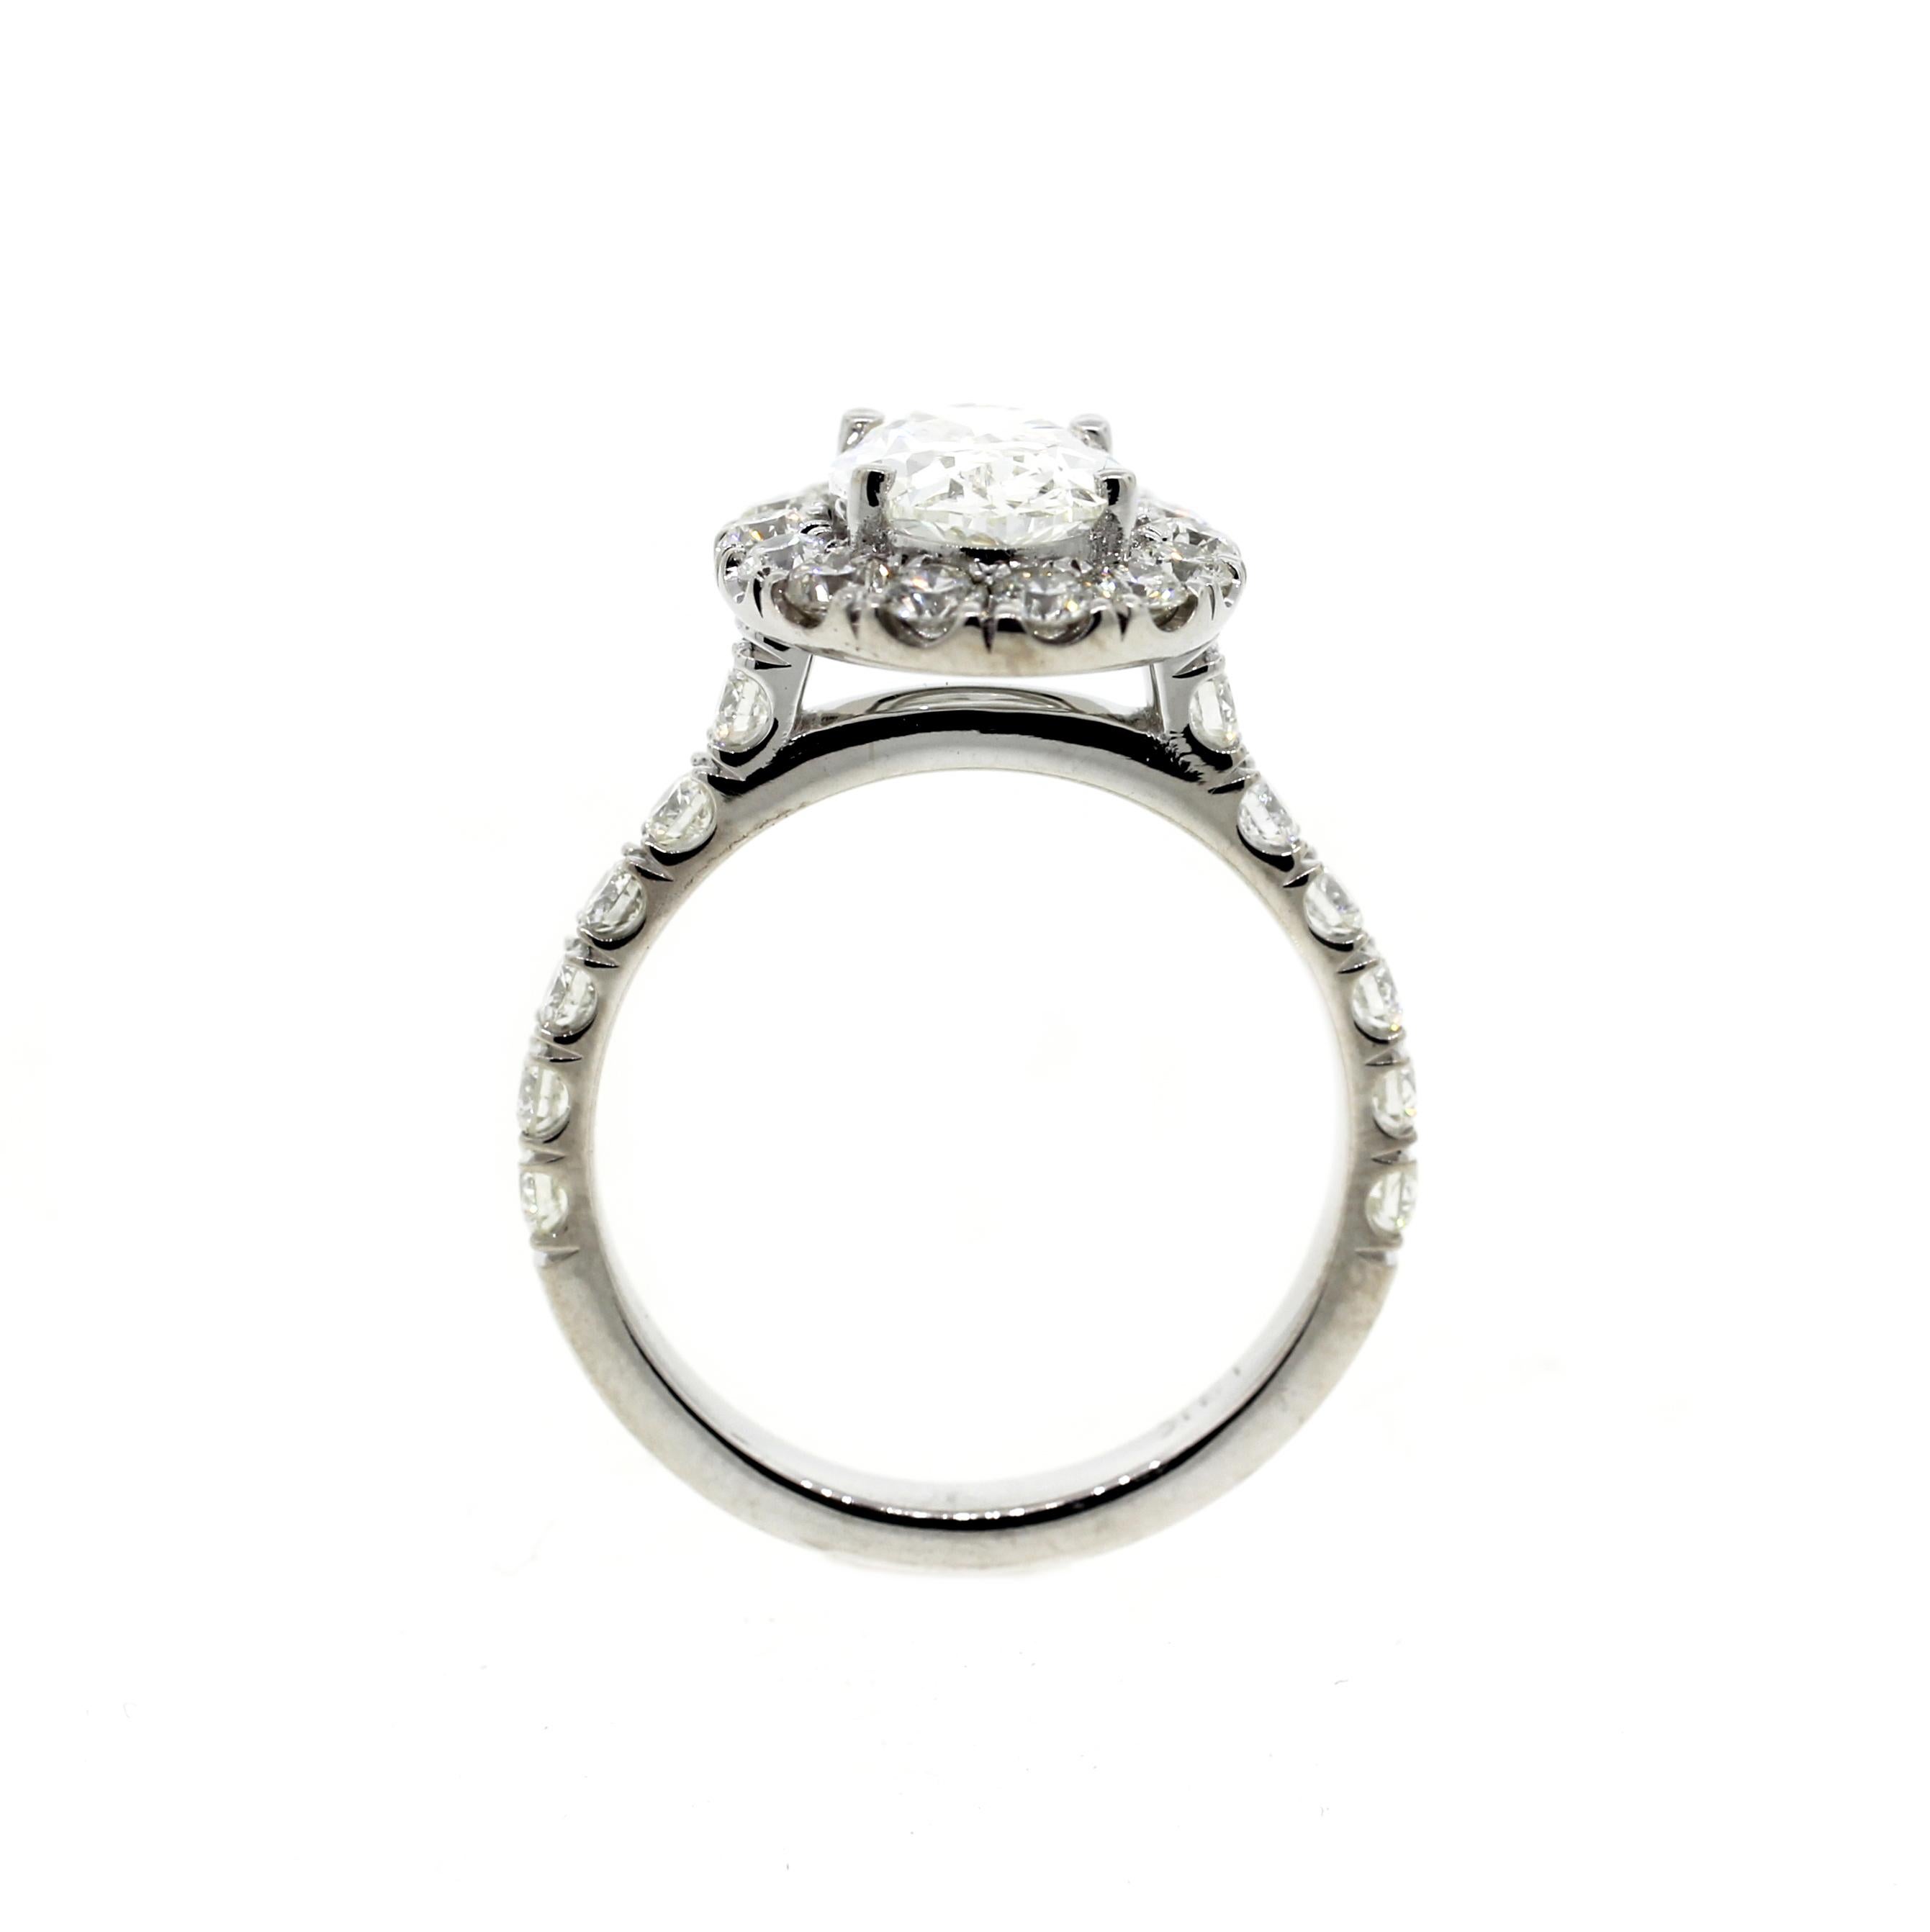 This classic oval shaped diamond engagement ring features a 1.25 oval shaped center stone surrounded by a larger than usual diamond halo. Set in 18K white gold with diamonds on the shank with a built-in (raised) cathedral setting. The matching